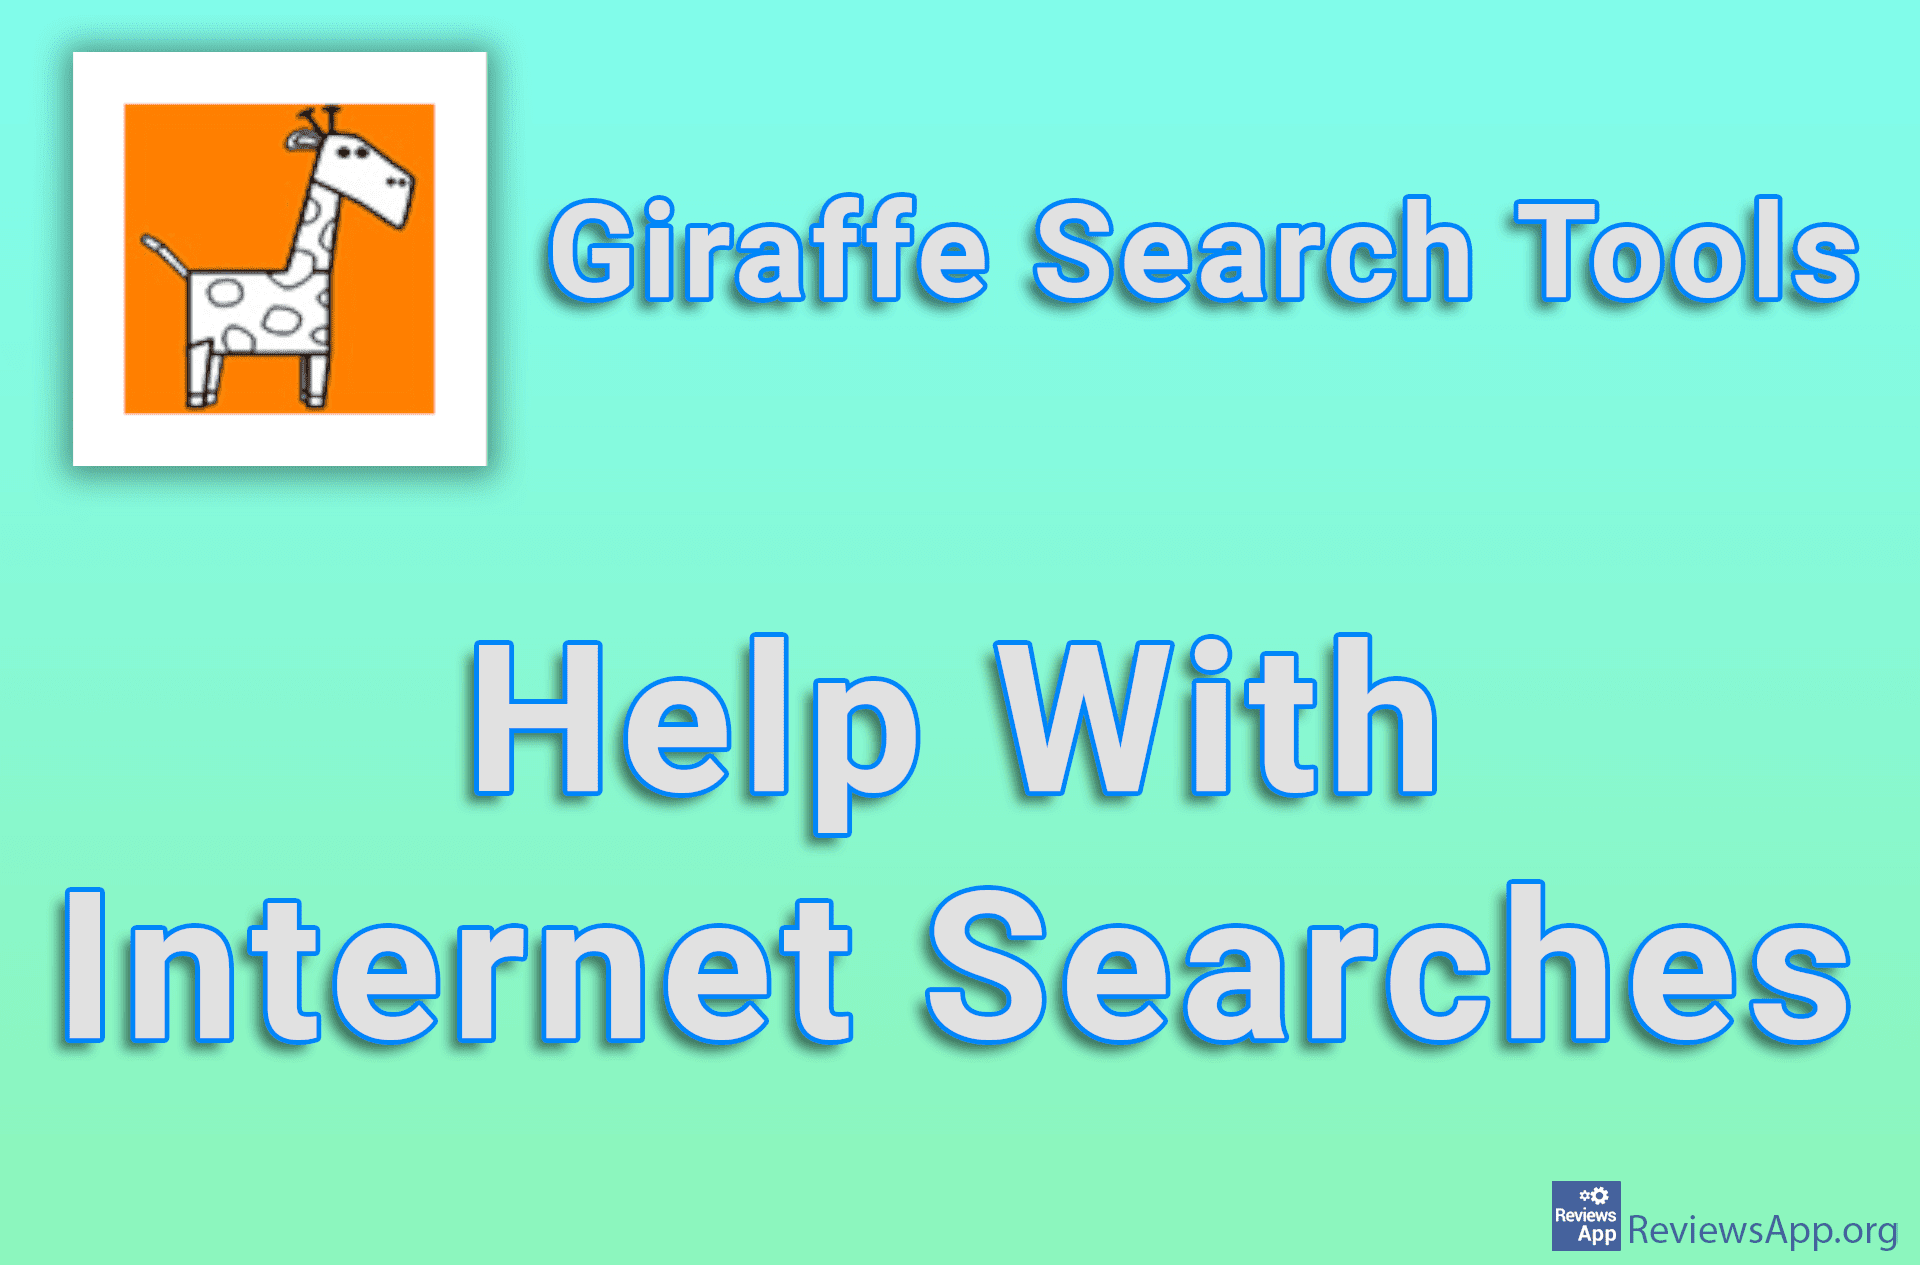 Giraffe Search Tools – Help With Internet Searches